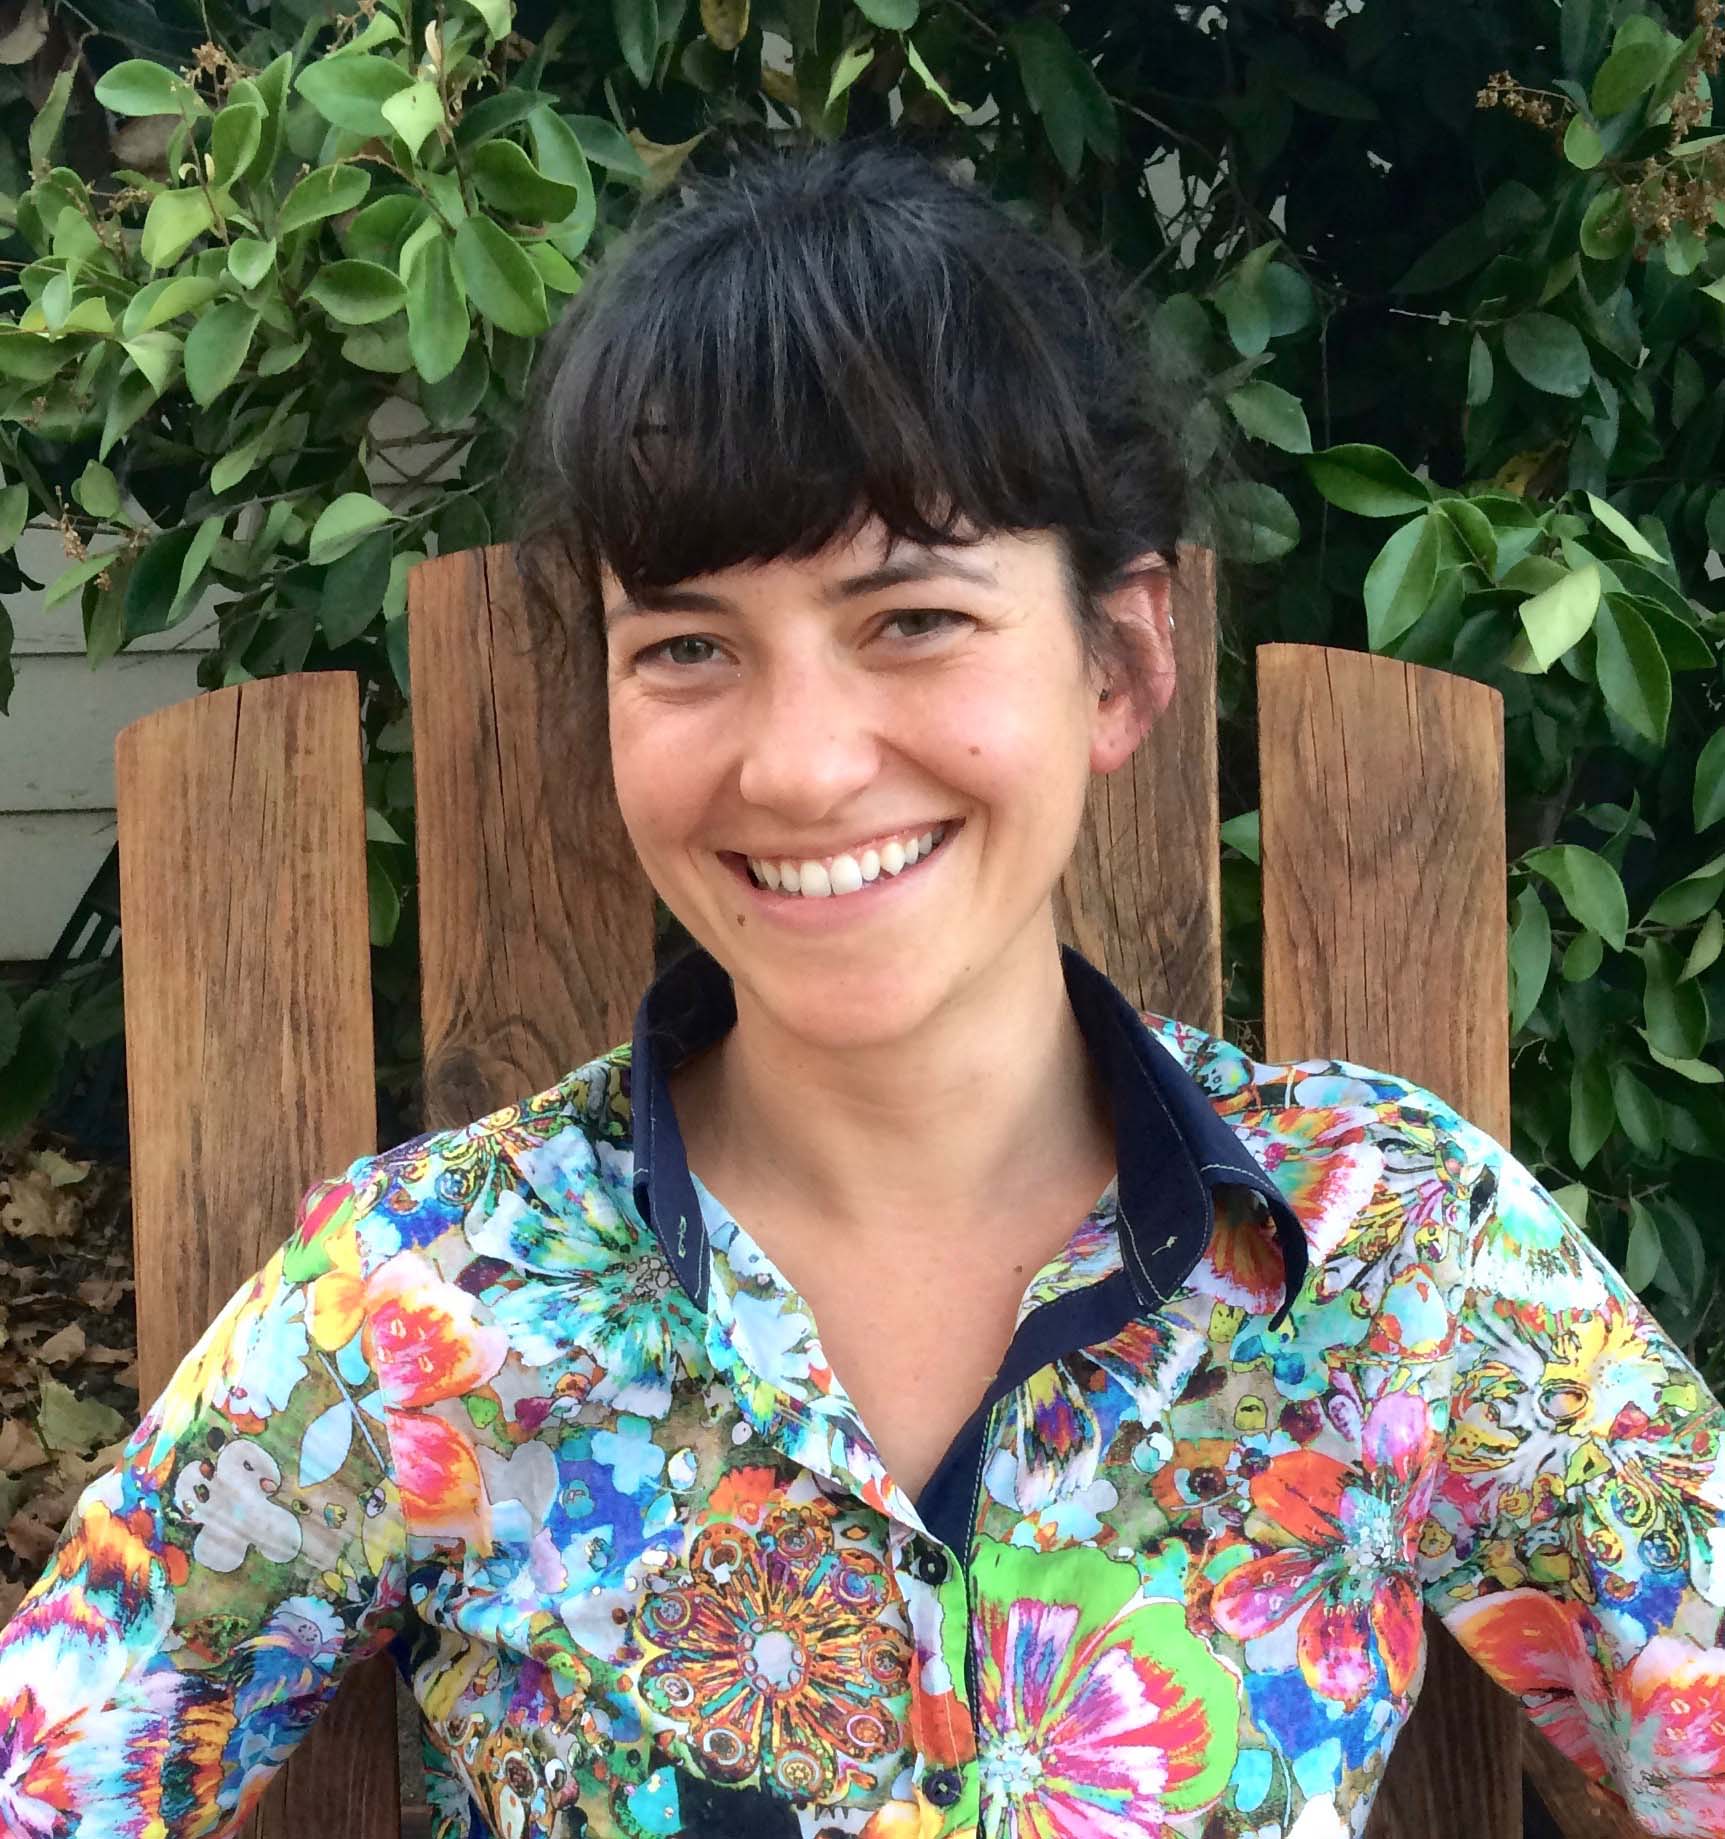 Natalie Popovich, a dark-haired person wearing a colorful button up shirt, smiles against a tree.